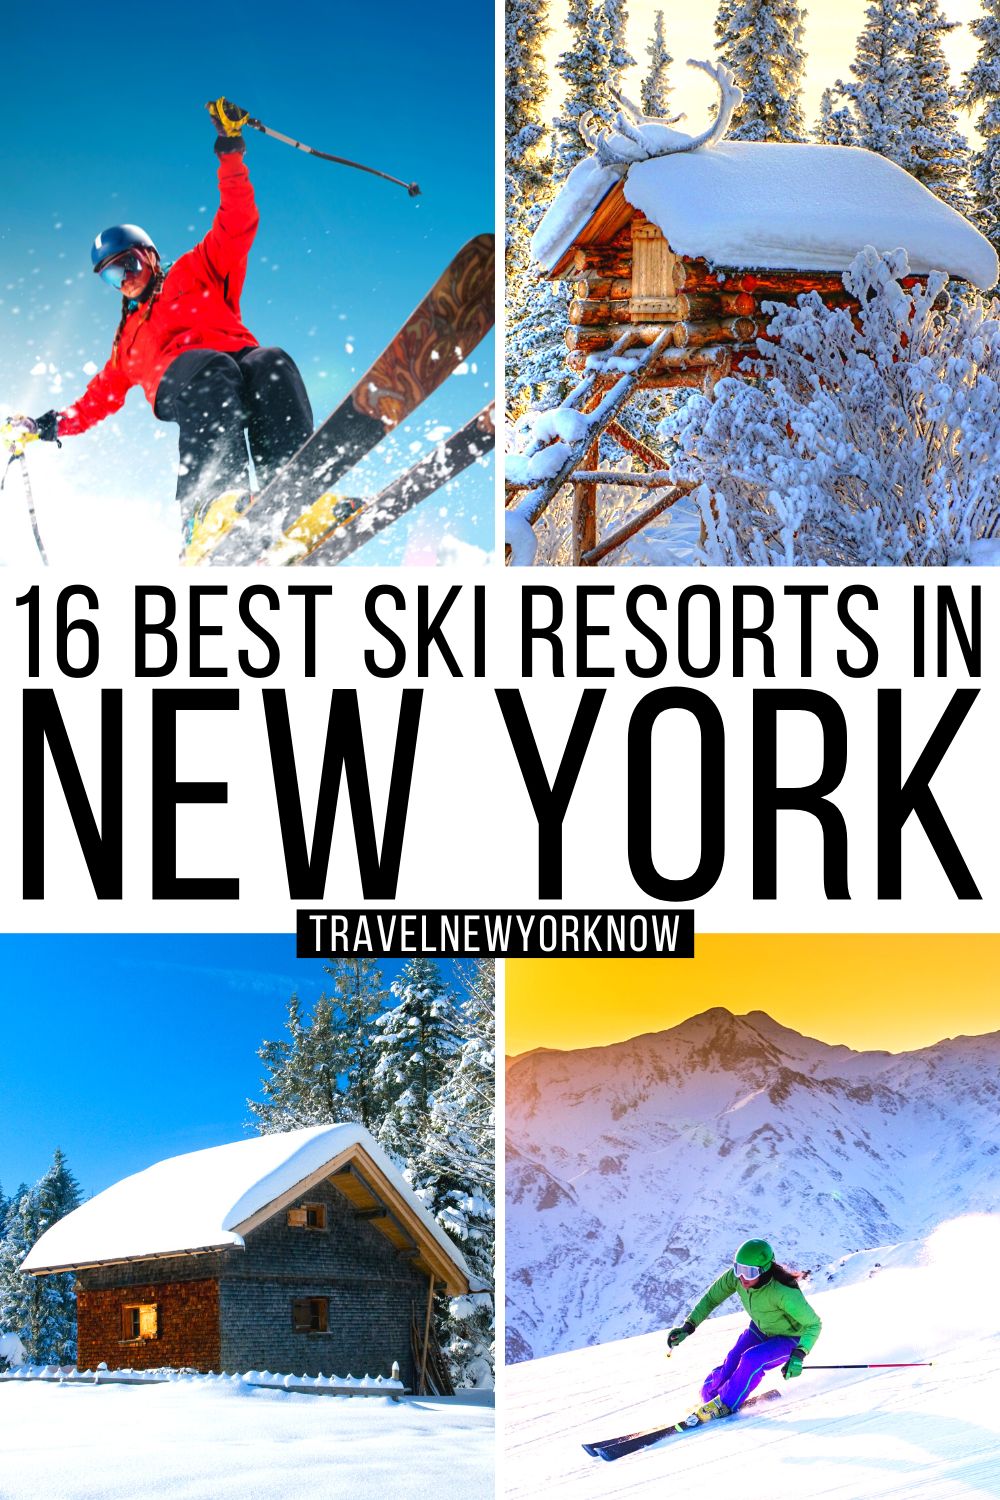 16 Amazing And Best Ski Resorts In New York Tips On Best Skiing In New York